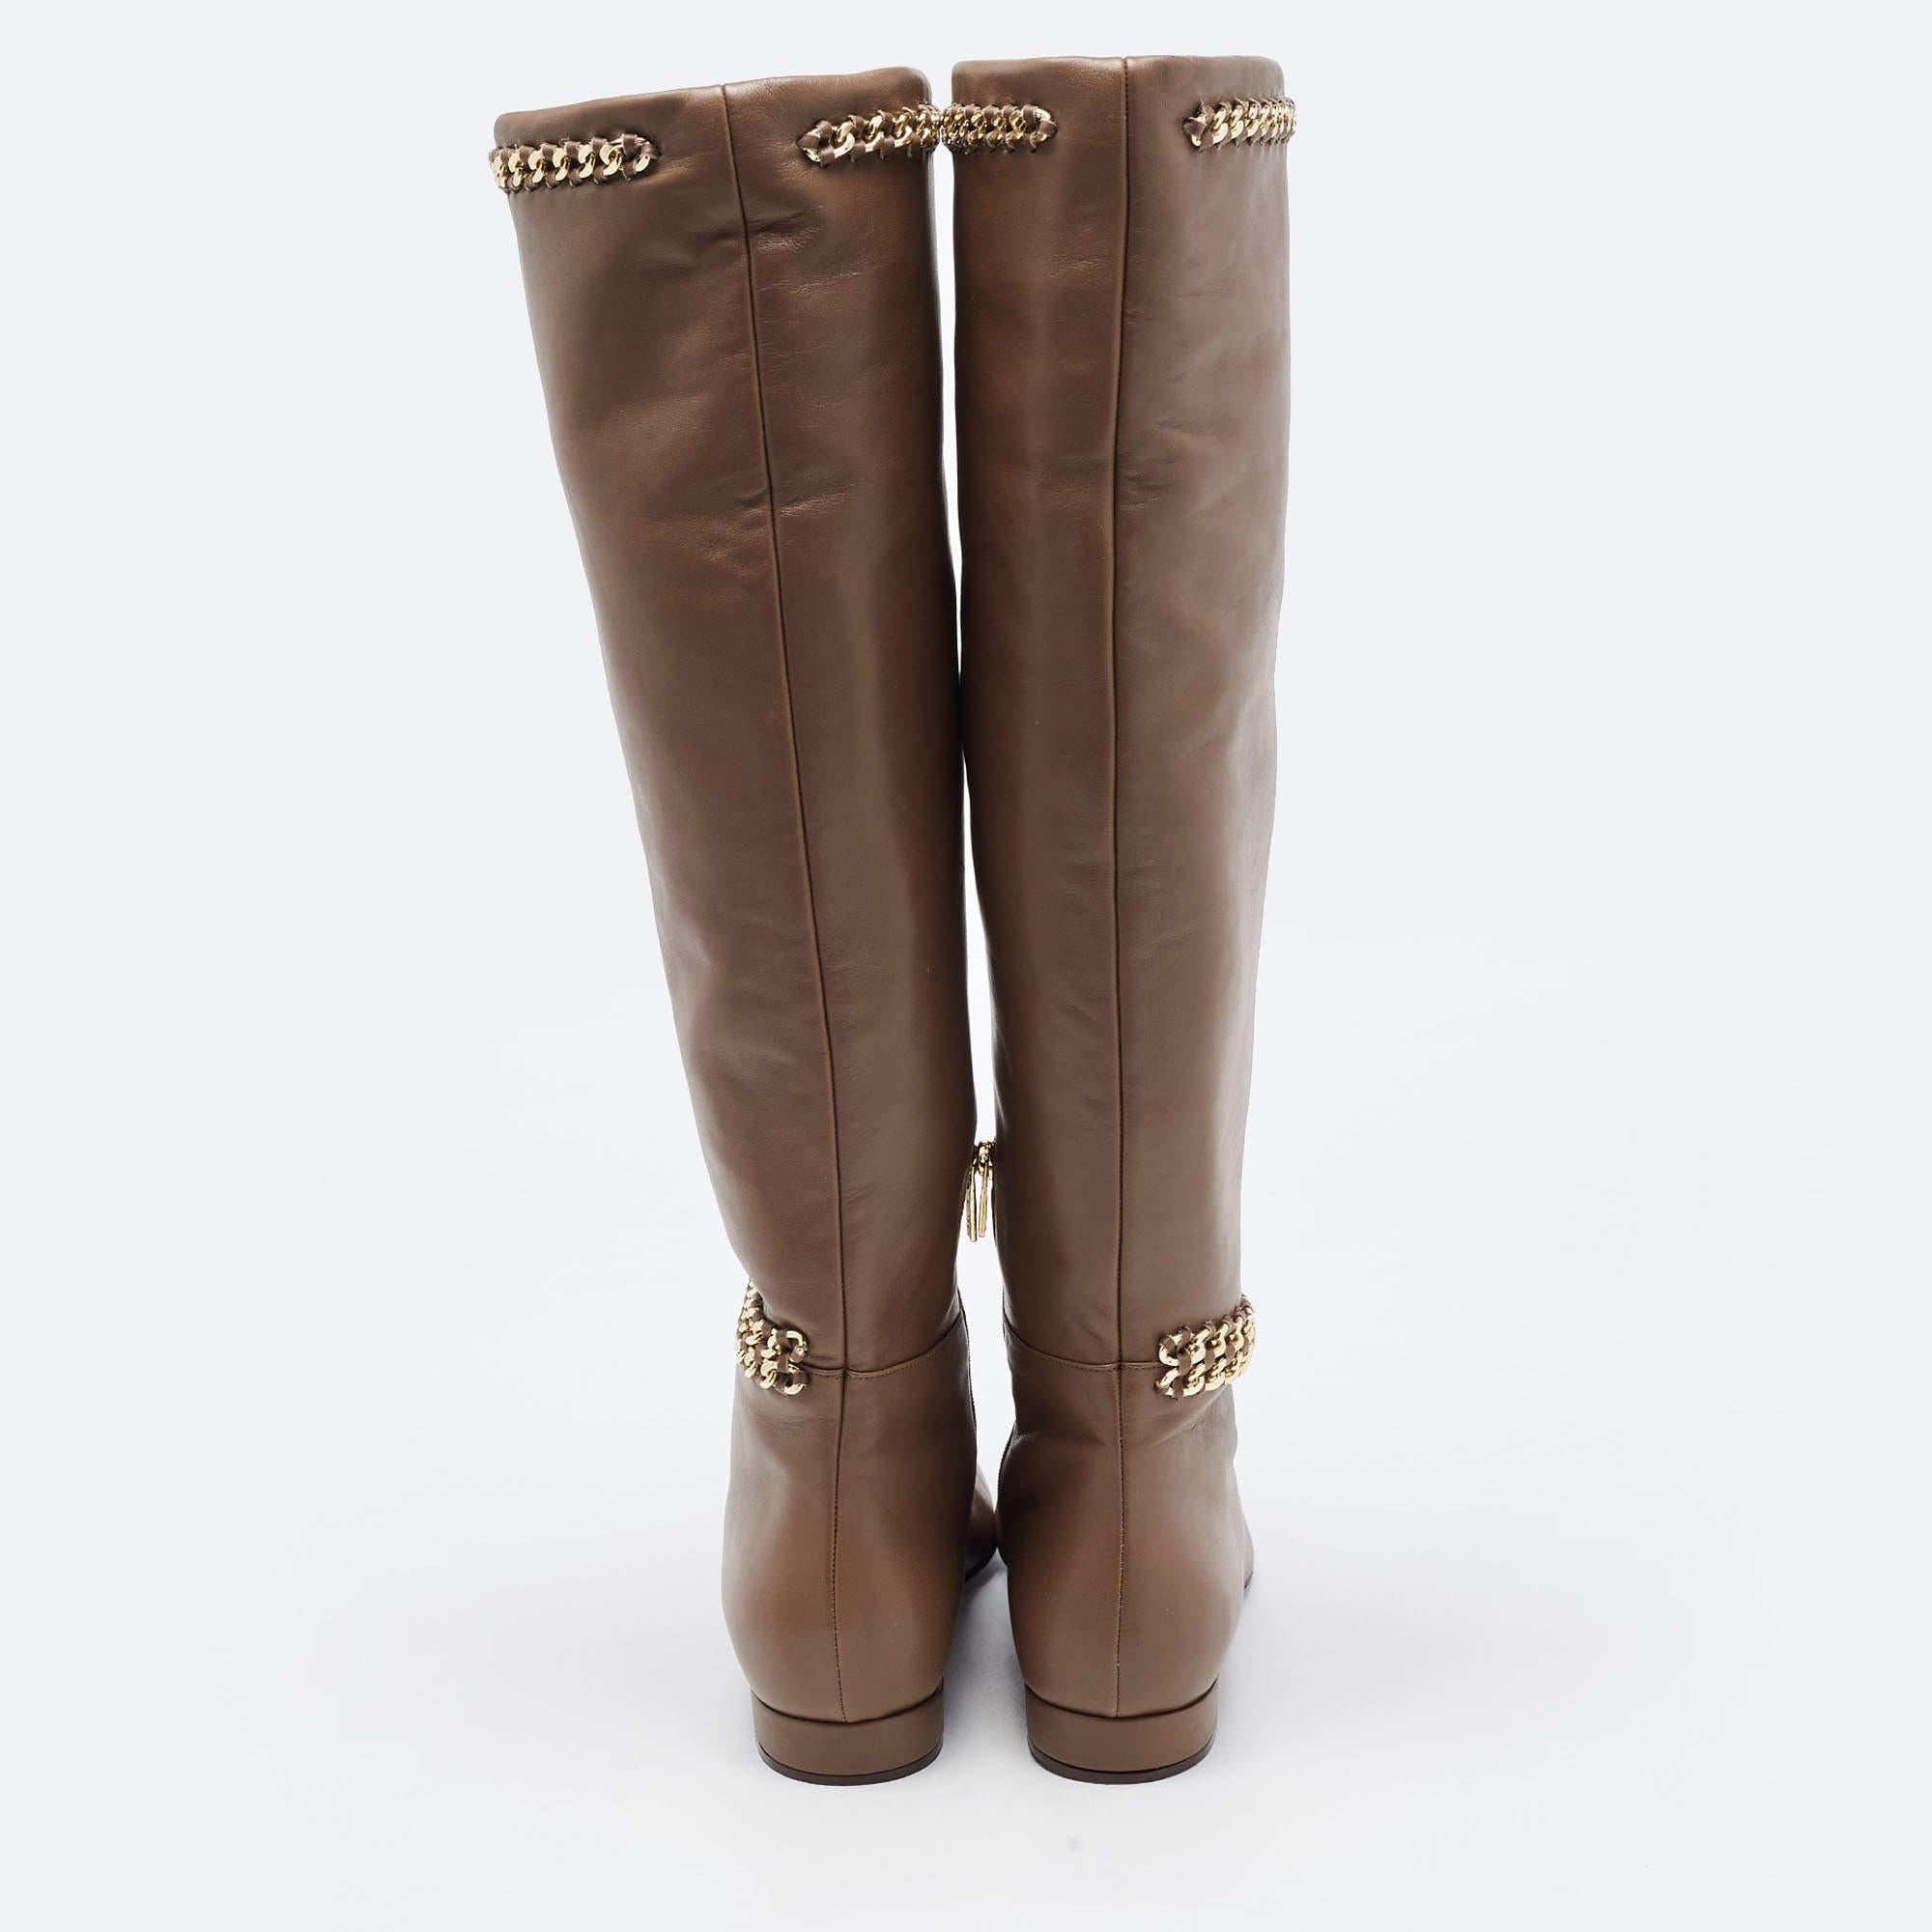 Le Silla Brown Leather Chain Detail Knee Length Boots Size 37.5 In Excellent Condition For Sale In Dubai, Al Qouz 2